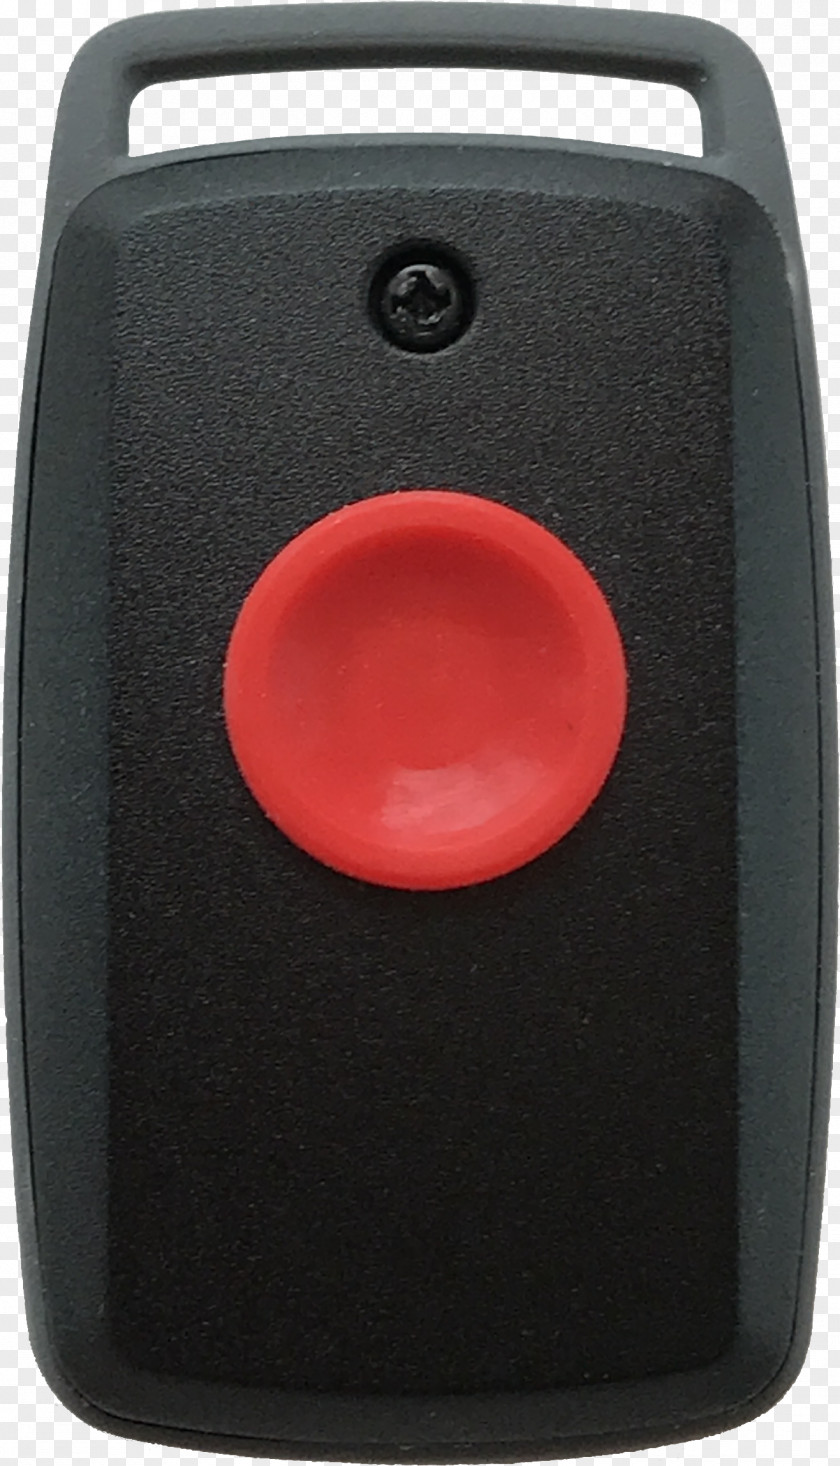 Crystal Button Alarm Android Technology PNG